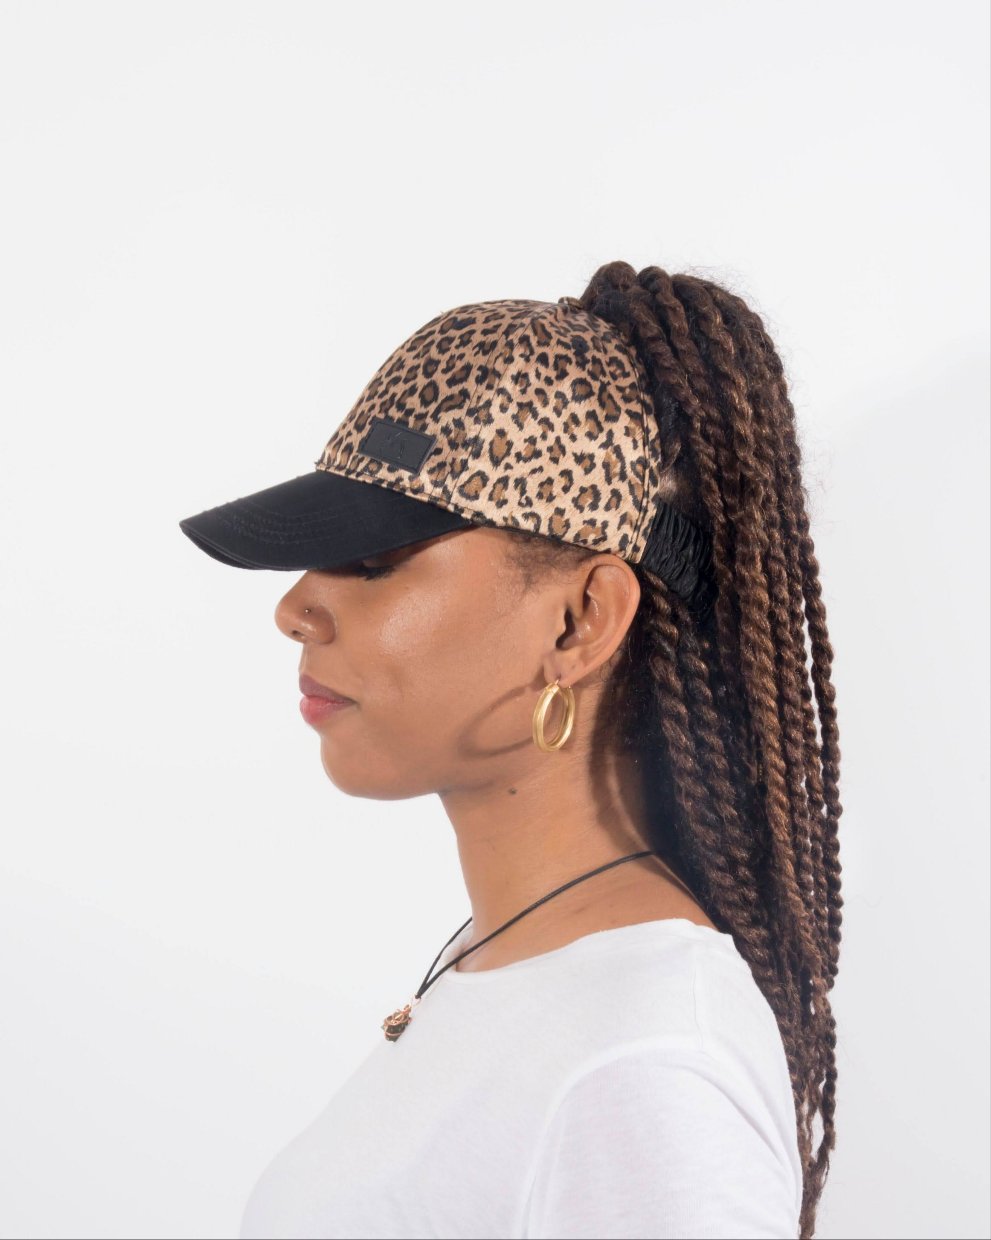 Print Satin Lined Half-Full Baseball Cap - Black Sunrise UK Satin Lined Hats,. Satin lined Beanie, Hoodies. For children, adults, babies. For those with curly natural hair, sensitive scalps and fragile curls.